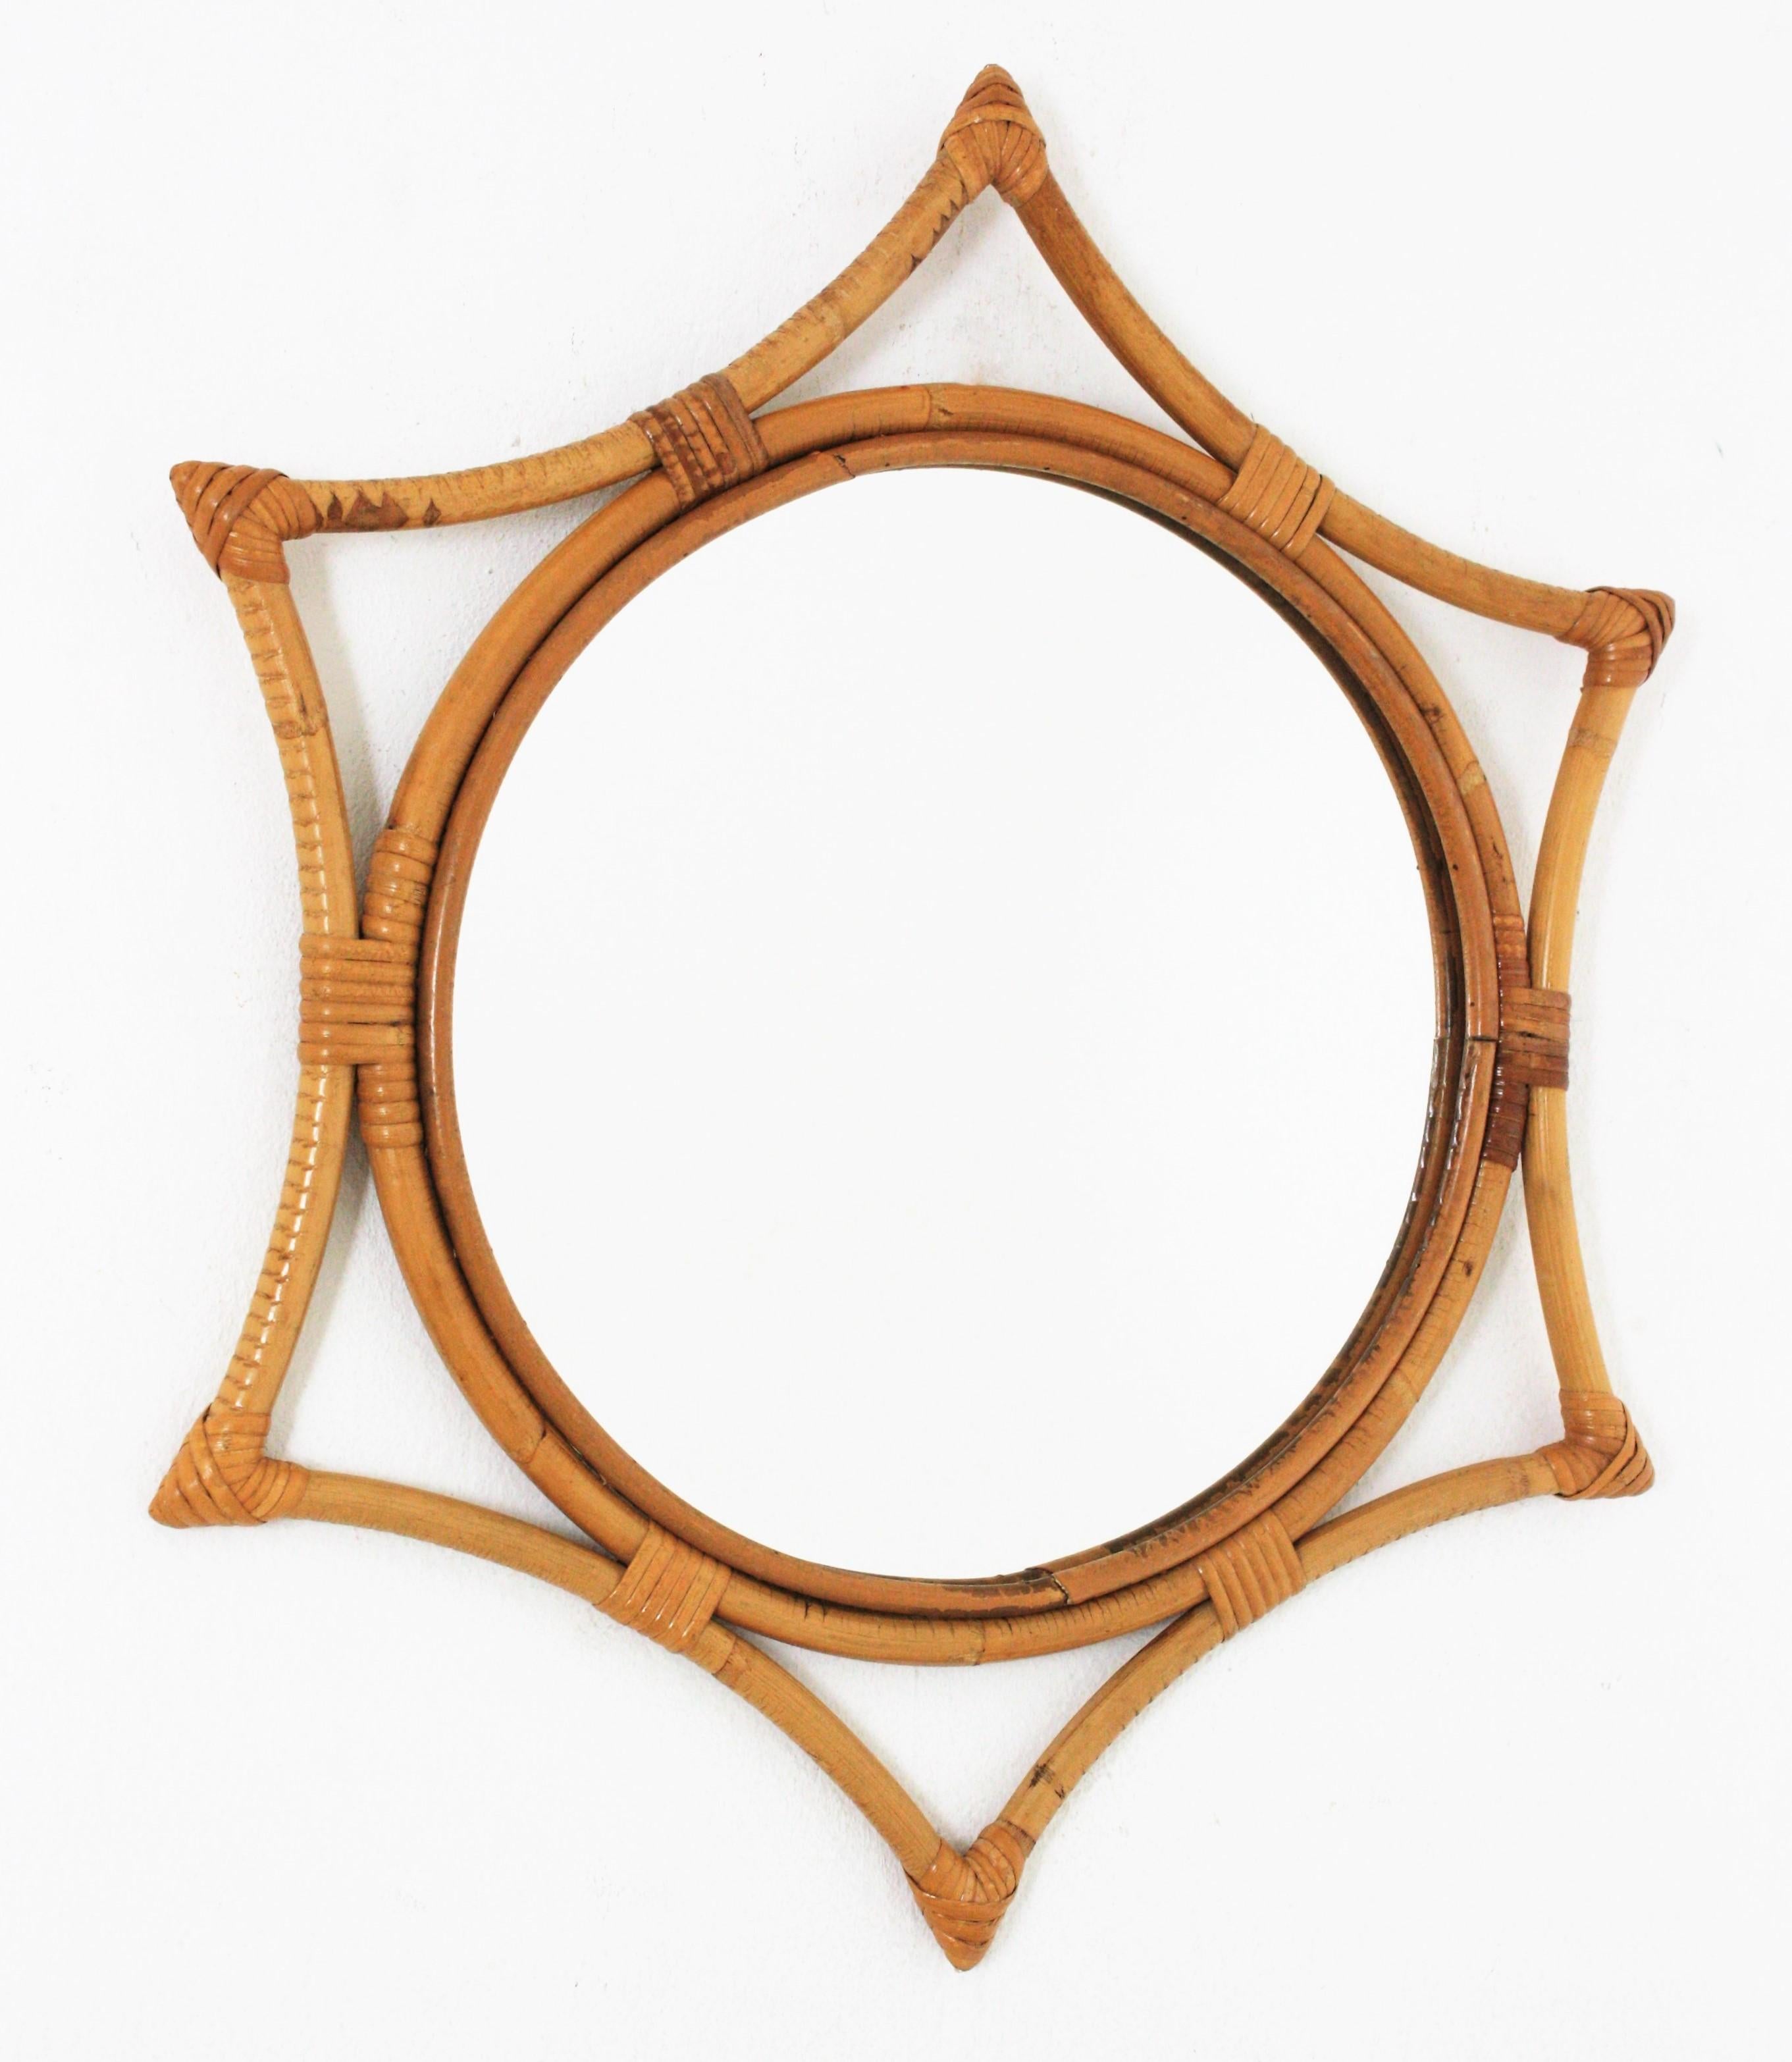 Midcentury bamboo rattan sunburst starburst mirror. Spain, 1960s.
This wall mirror features a round mirror glass framed by a bamboo star shaped frame with wicker /rattan tied accents.
Beautiful placed alone but also interesting as a part of a wall